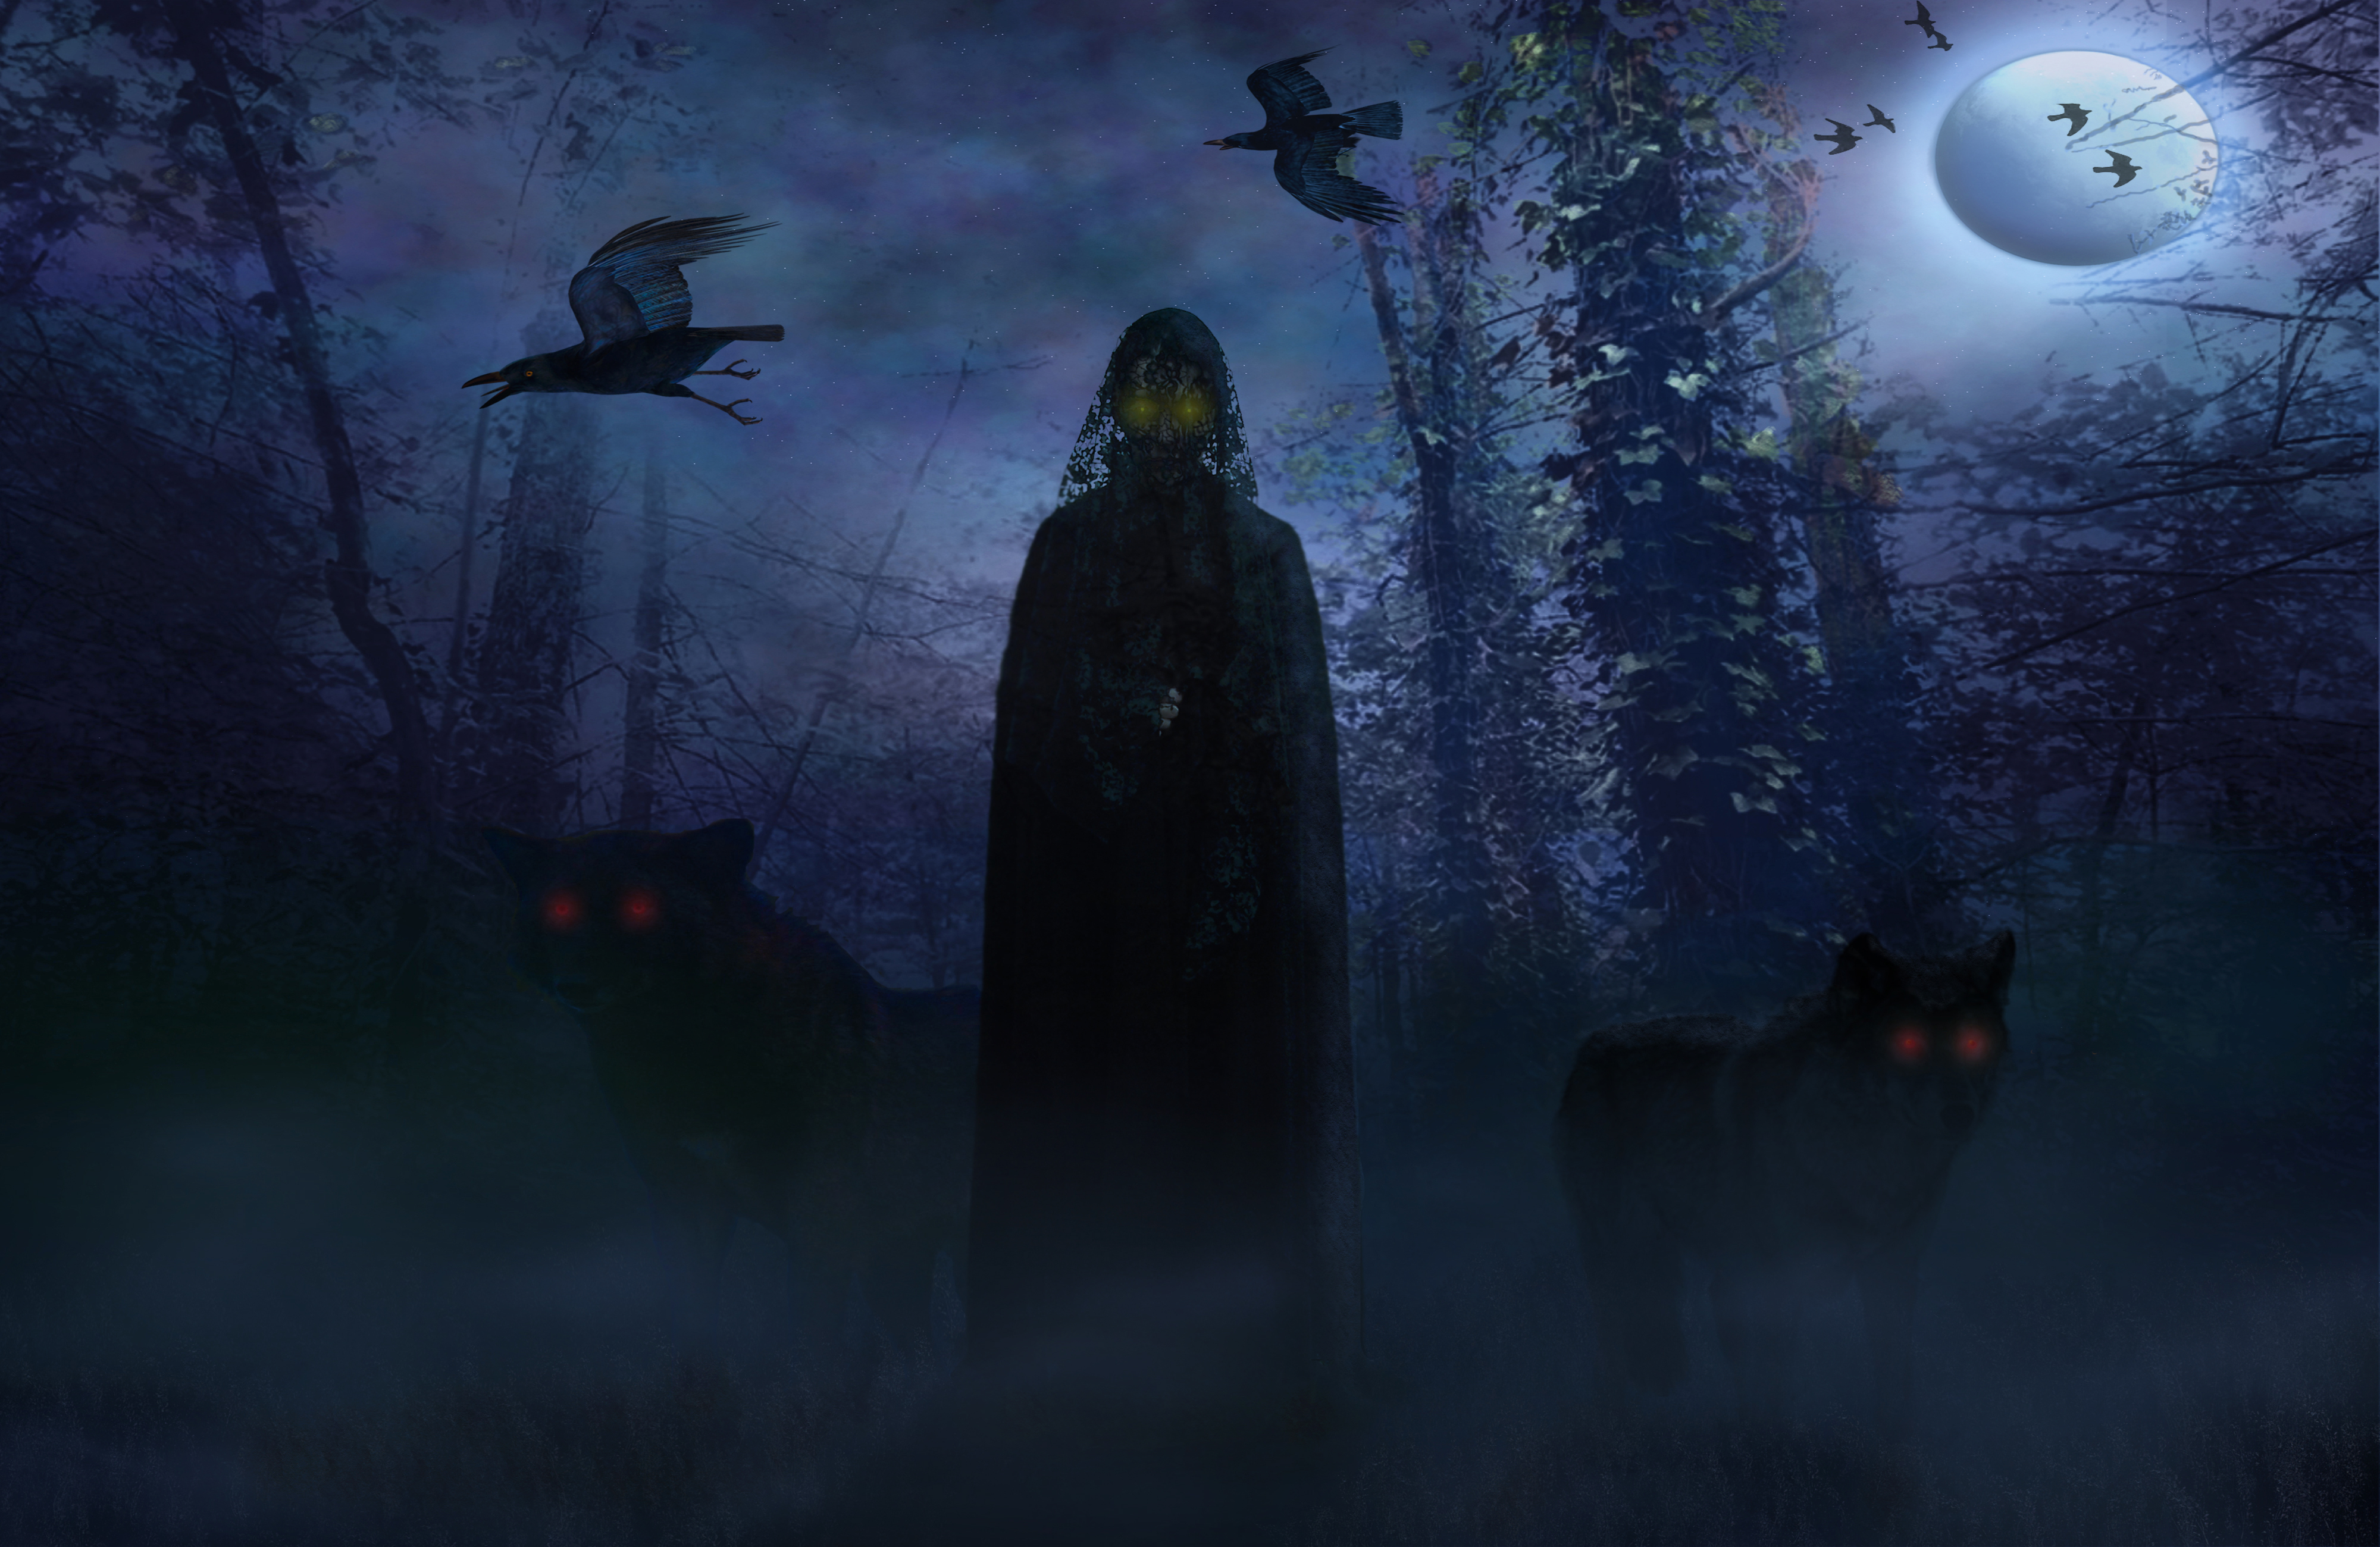 New Scary WallPapers Dark Horror HD Backgrounds The Art 1920Ã1080 Scary  Wallpaper 48